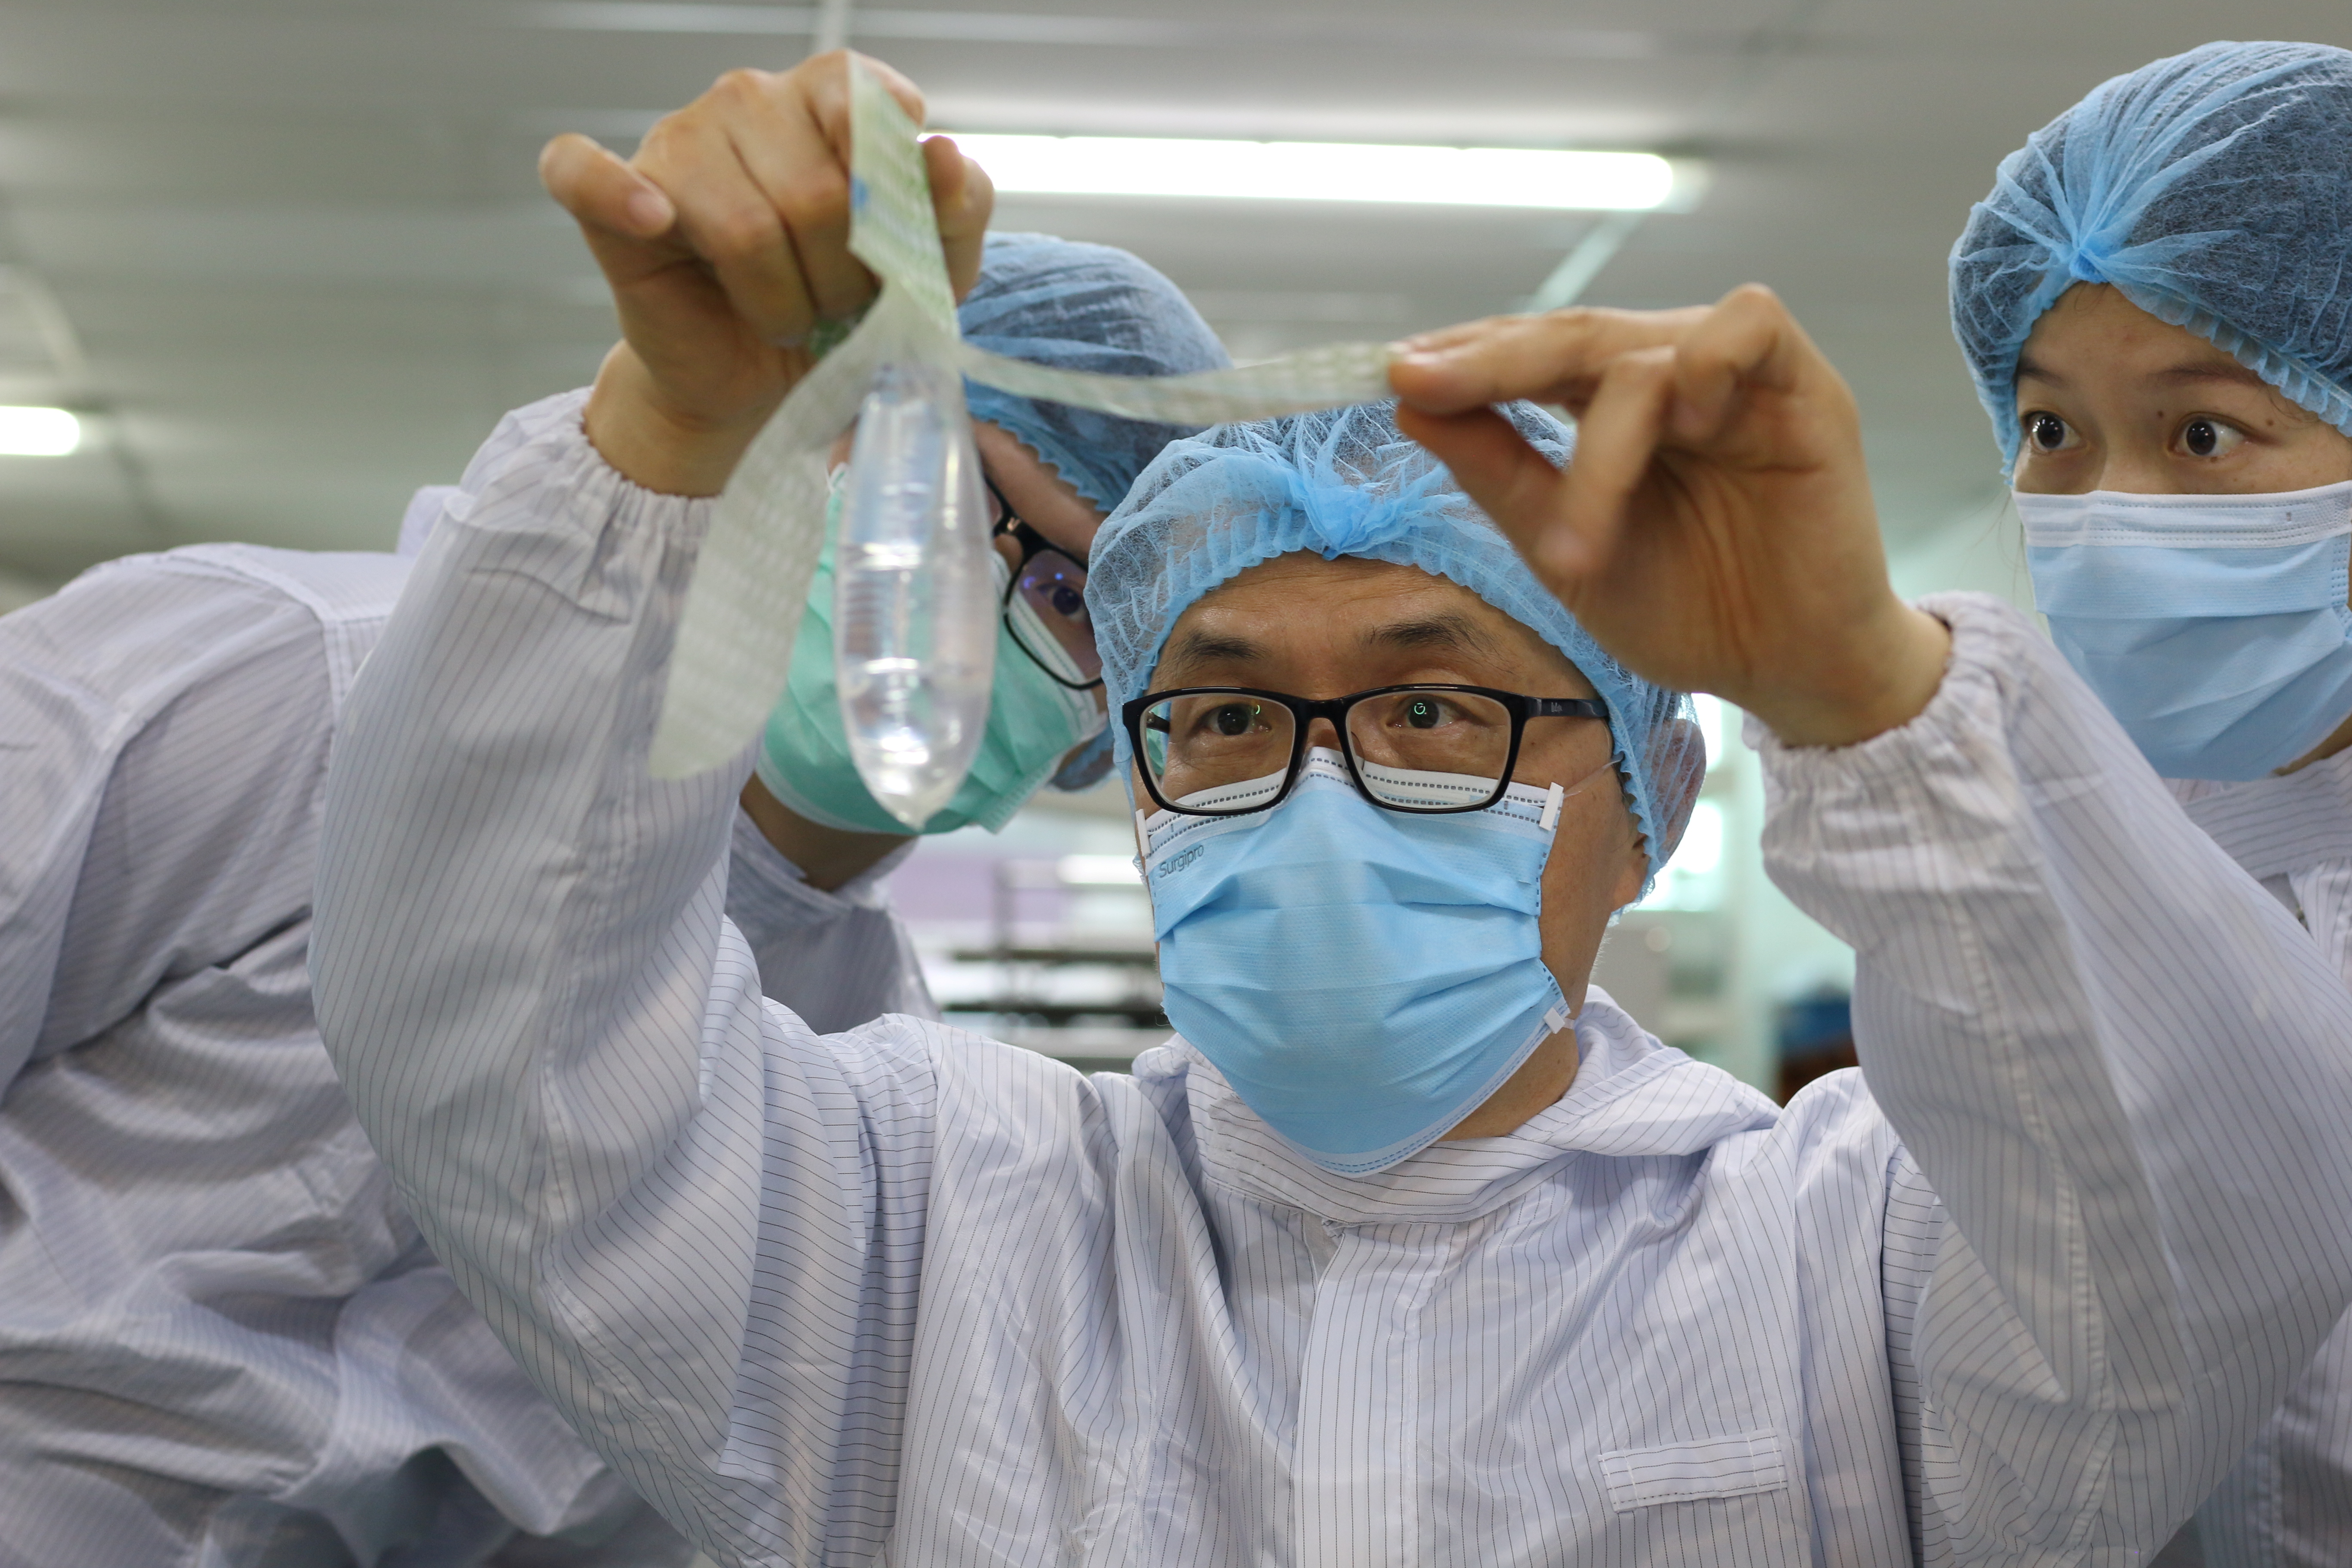 John Tang Ing Ching, founder and inventor of Wondaleaf Unisex Condom inspects the unisex condom at his factory in Sibu